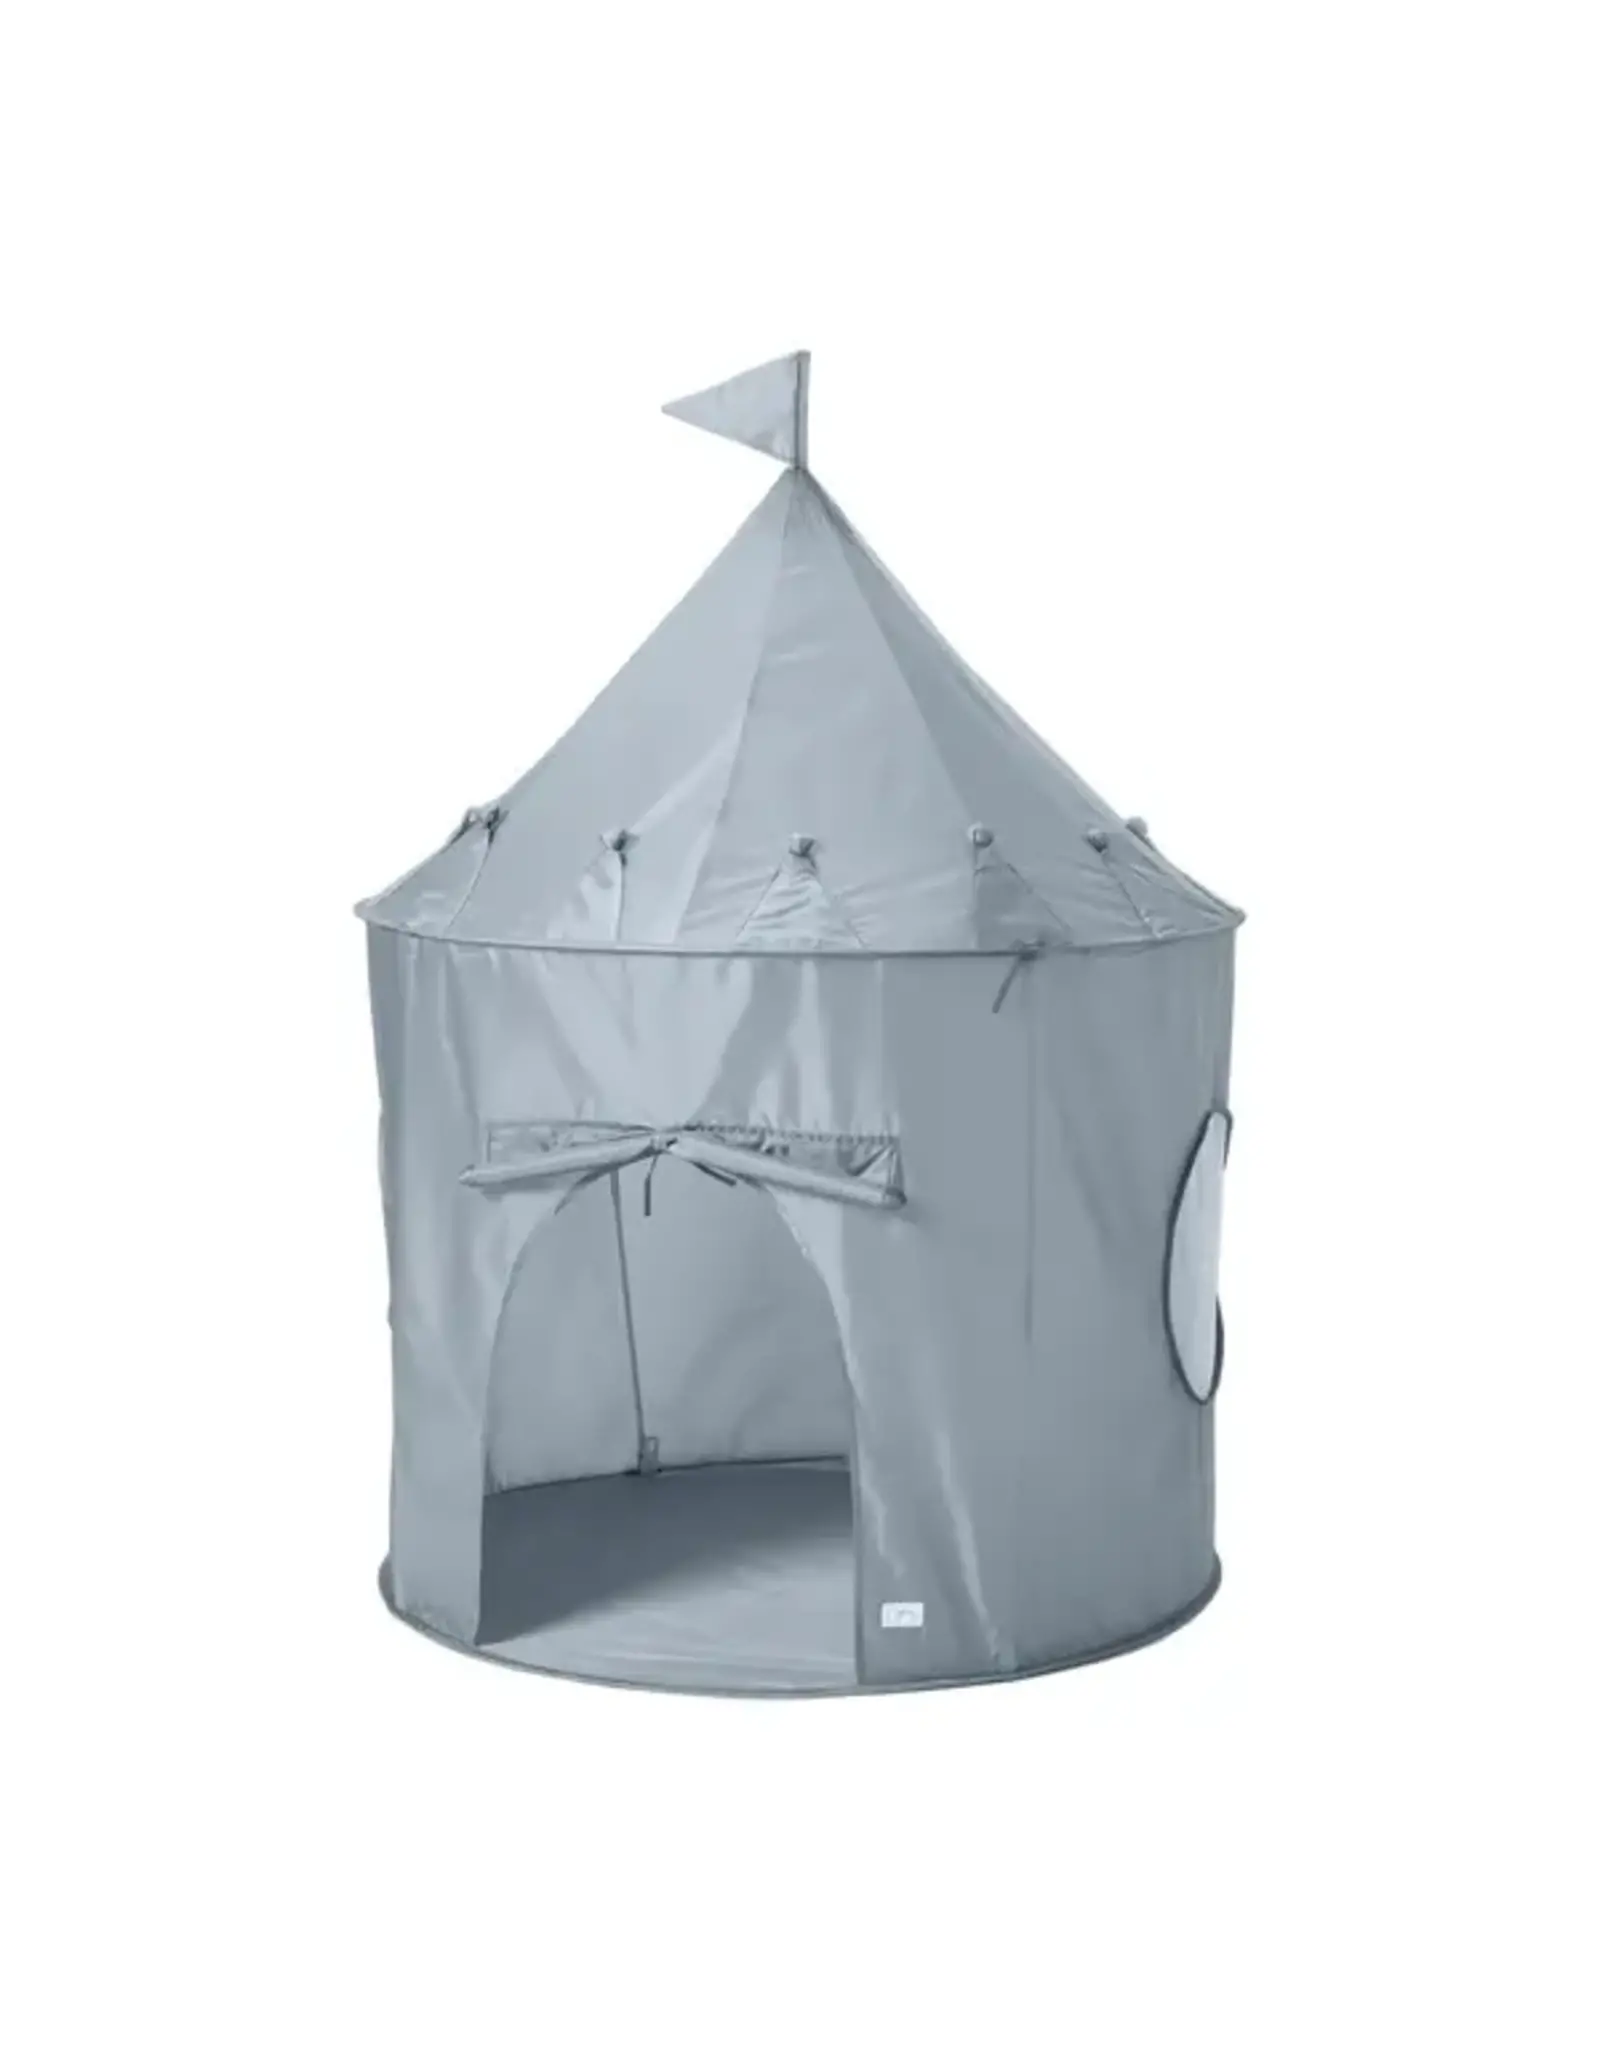 3 Sprouts Blue Recycled Fabric Play Tent Castle